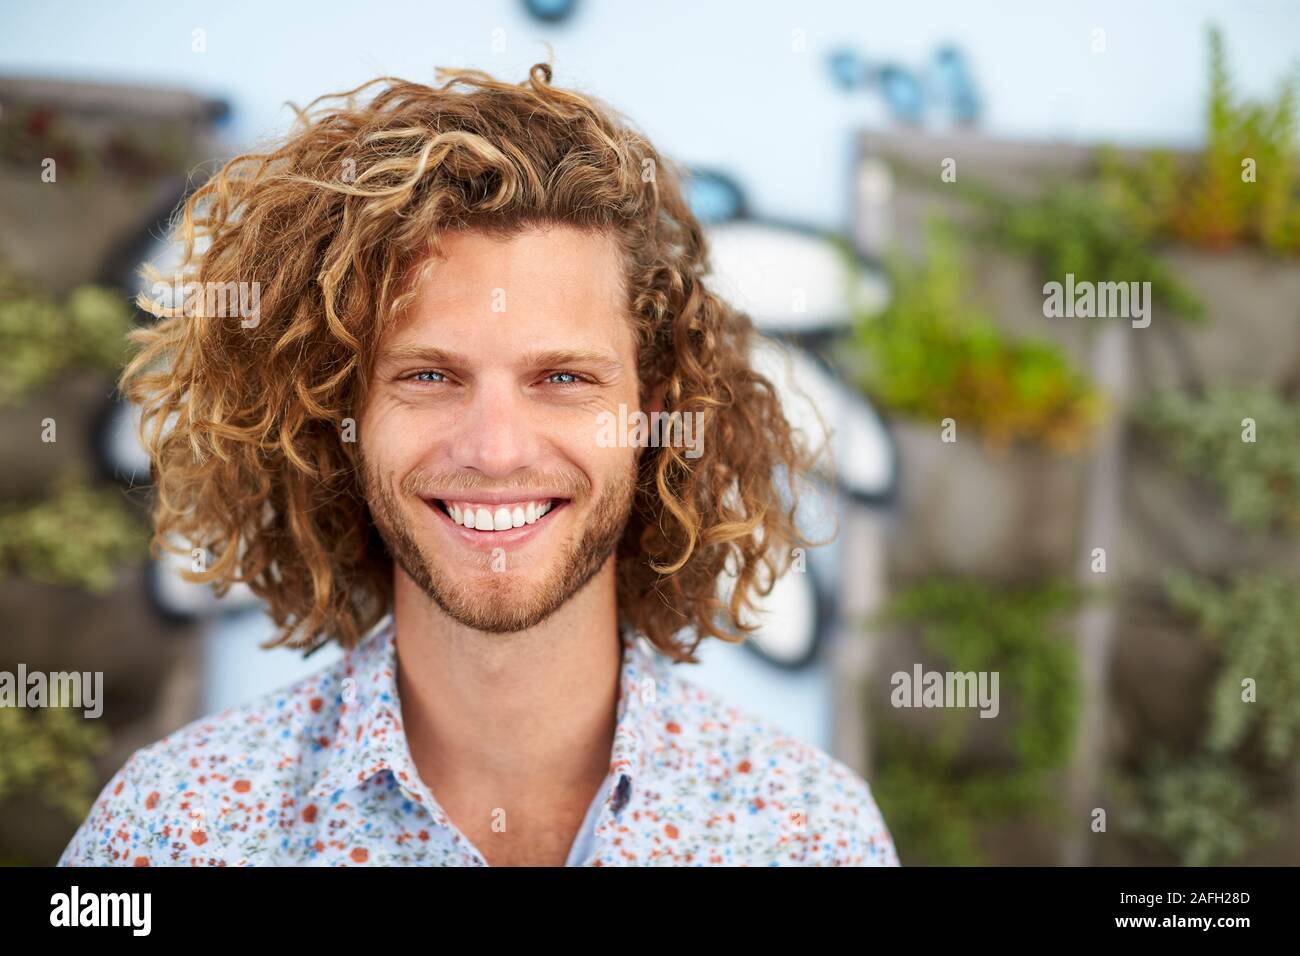 Outdoor Head And Shoulders Portrait Of Smiling Young Man Stock Photo